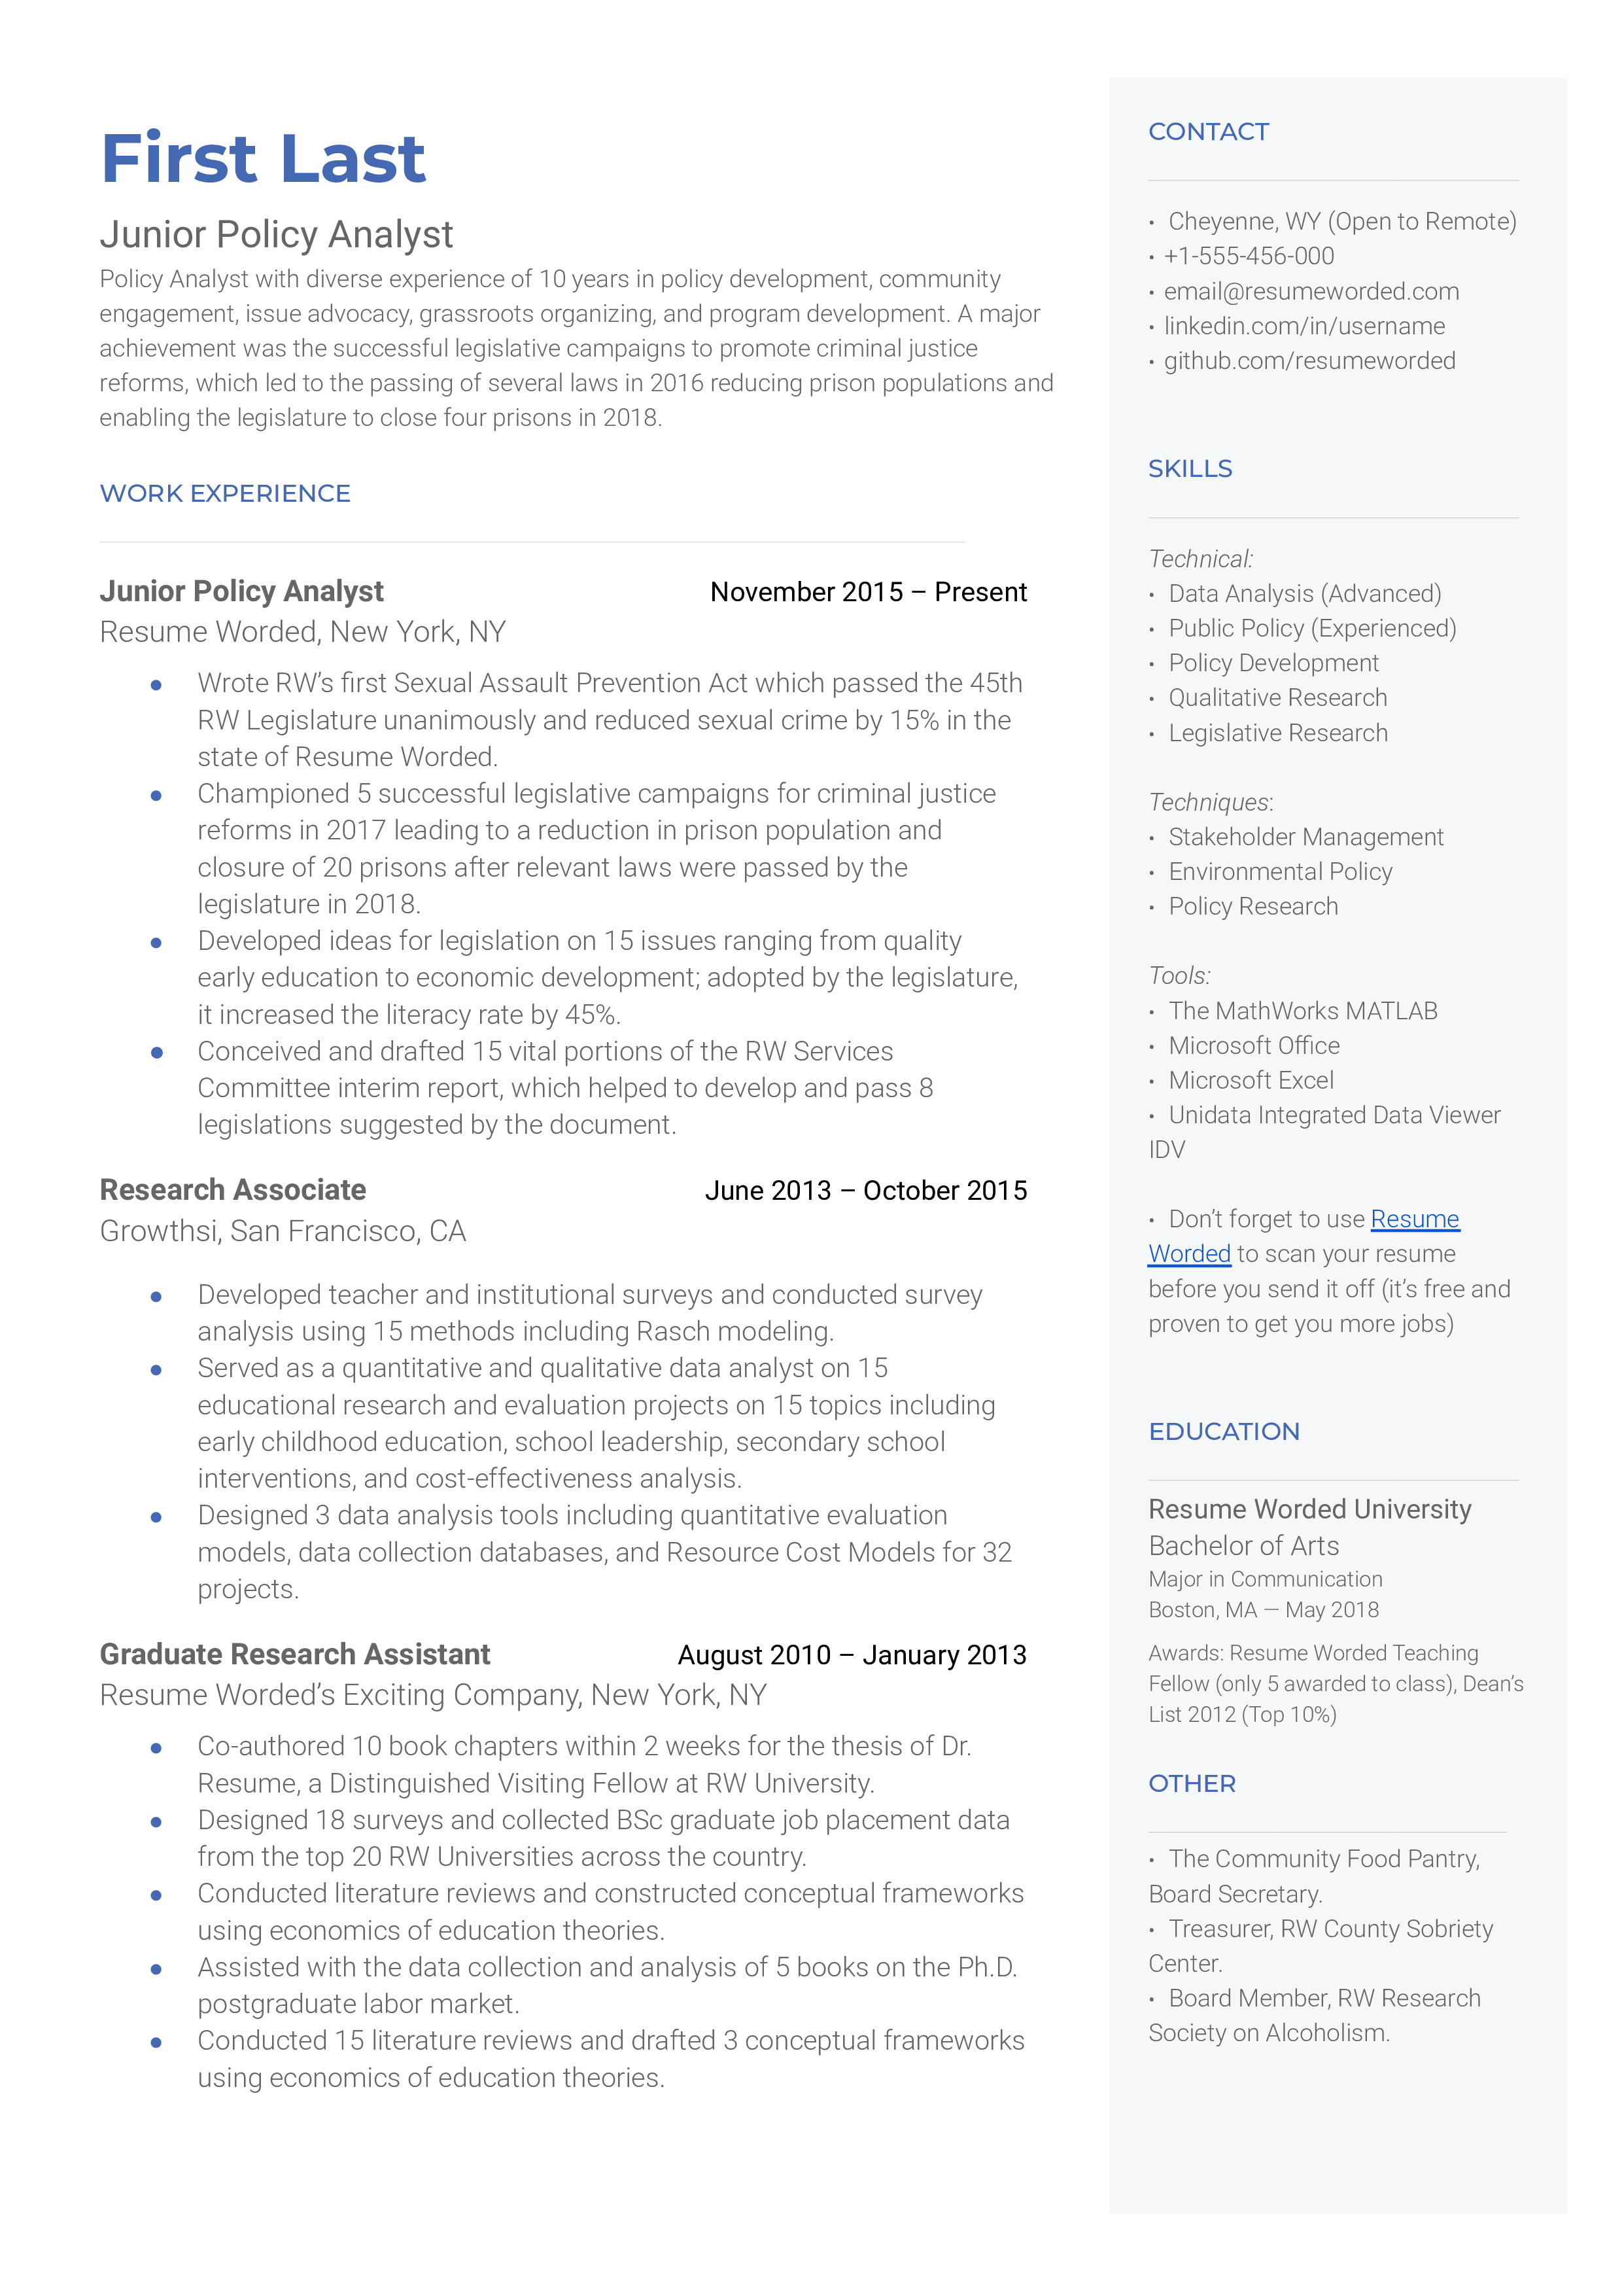 An engaging CV layout showcasing skills and experiences relevant for a junior policy analyst role.